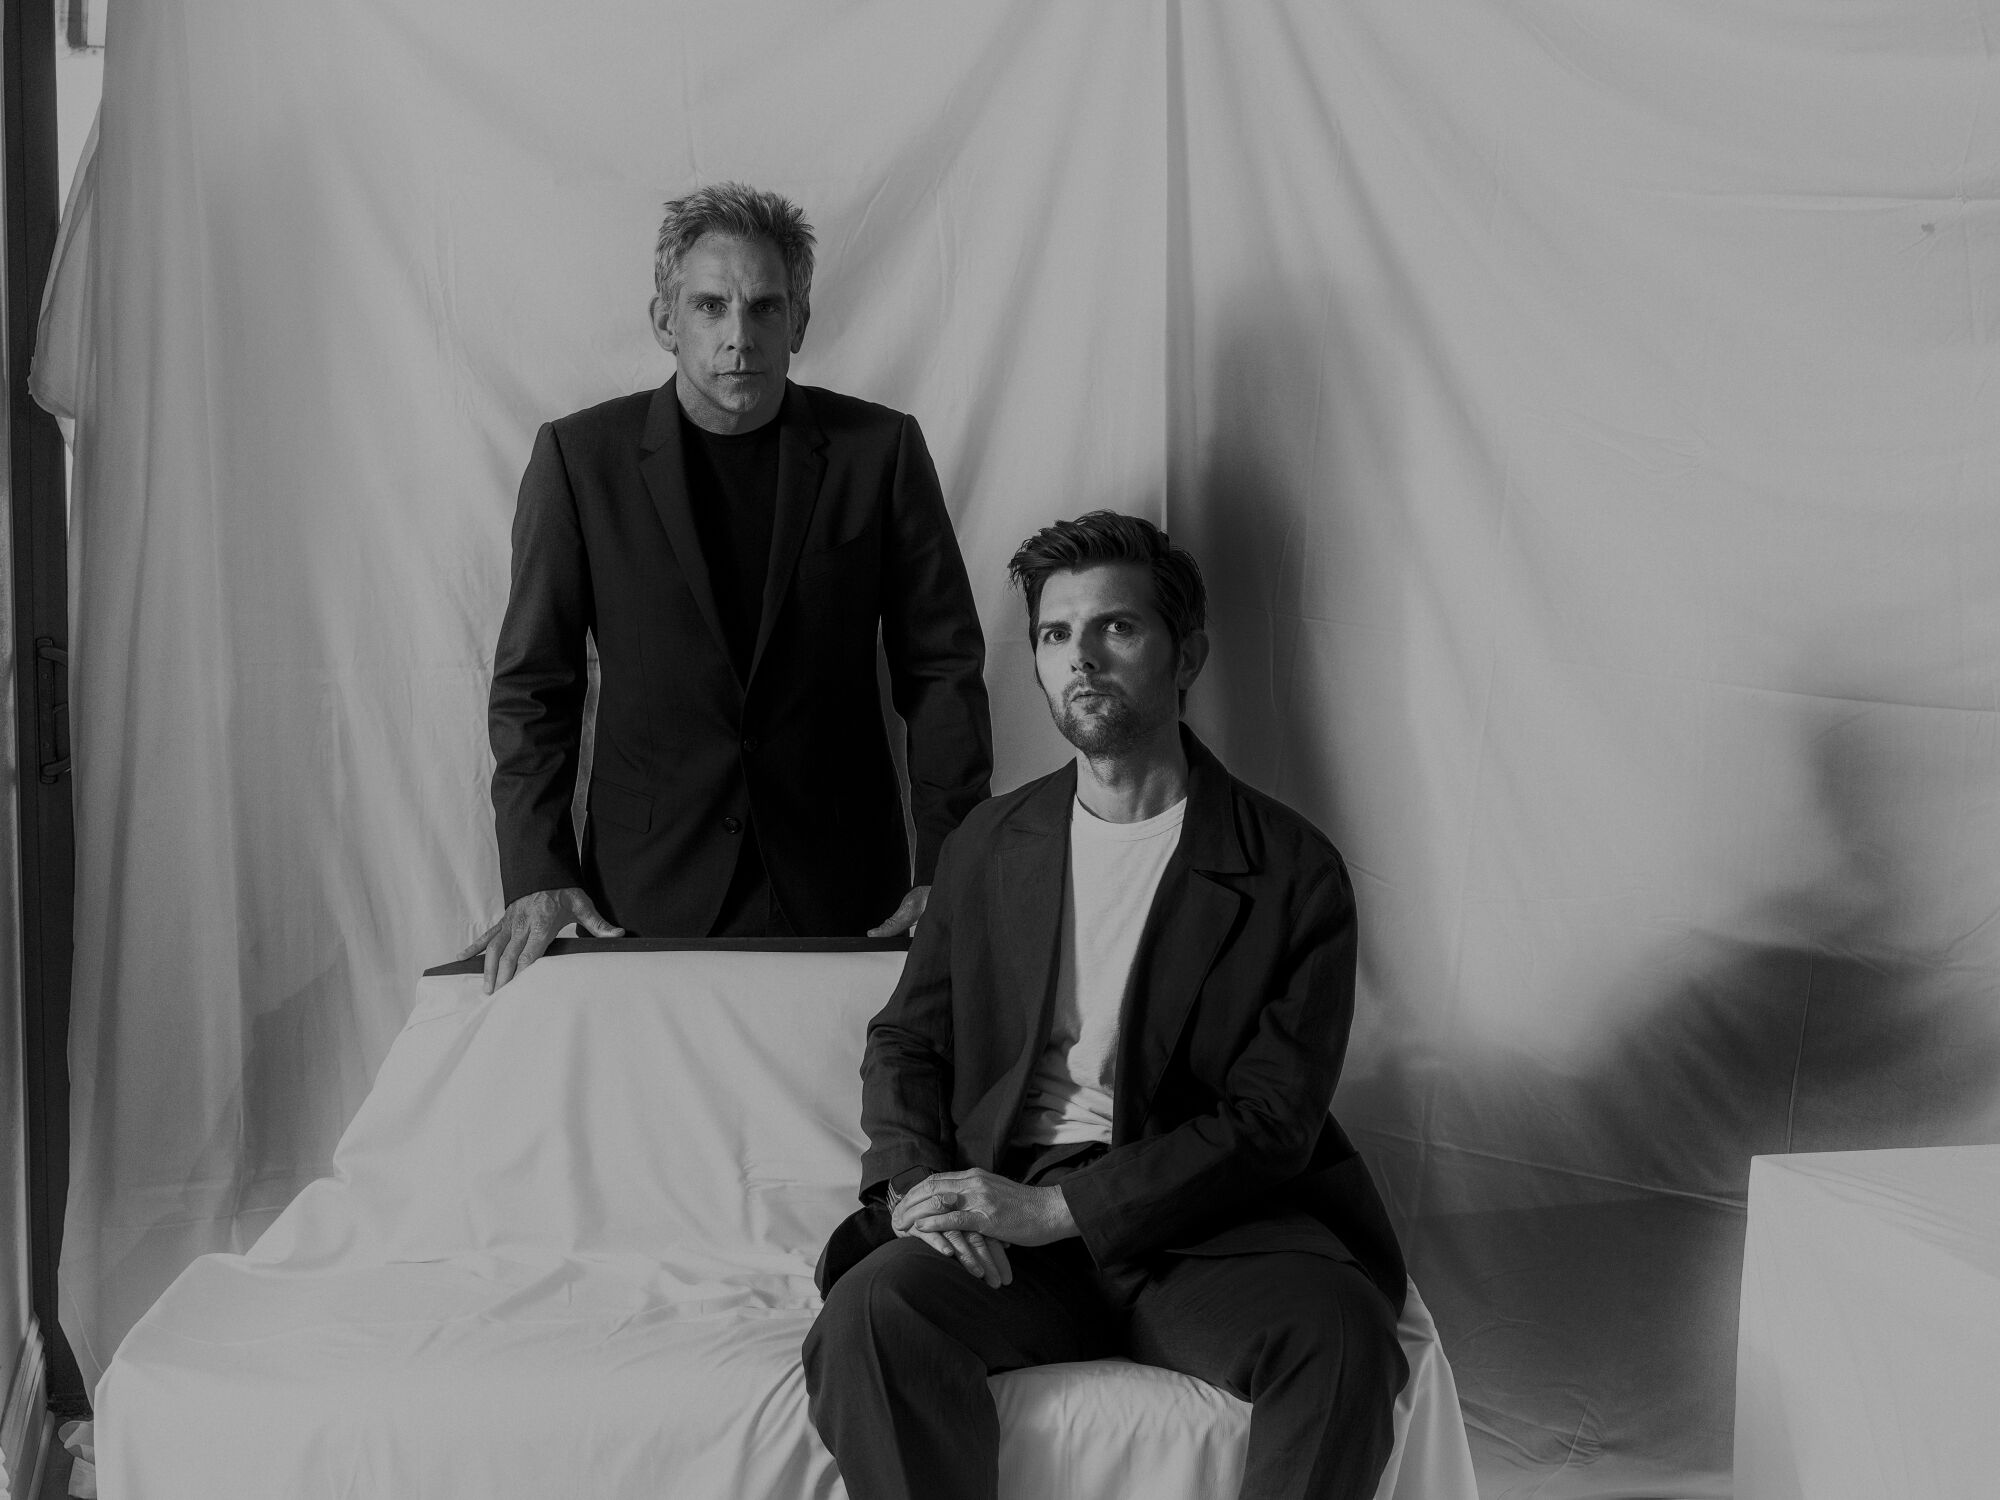 Two men pose for a portrait in front of a white fabric background